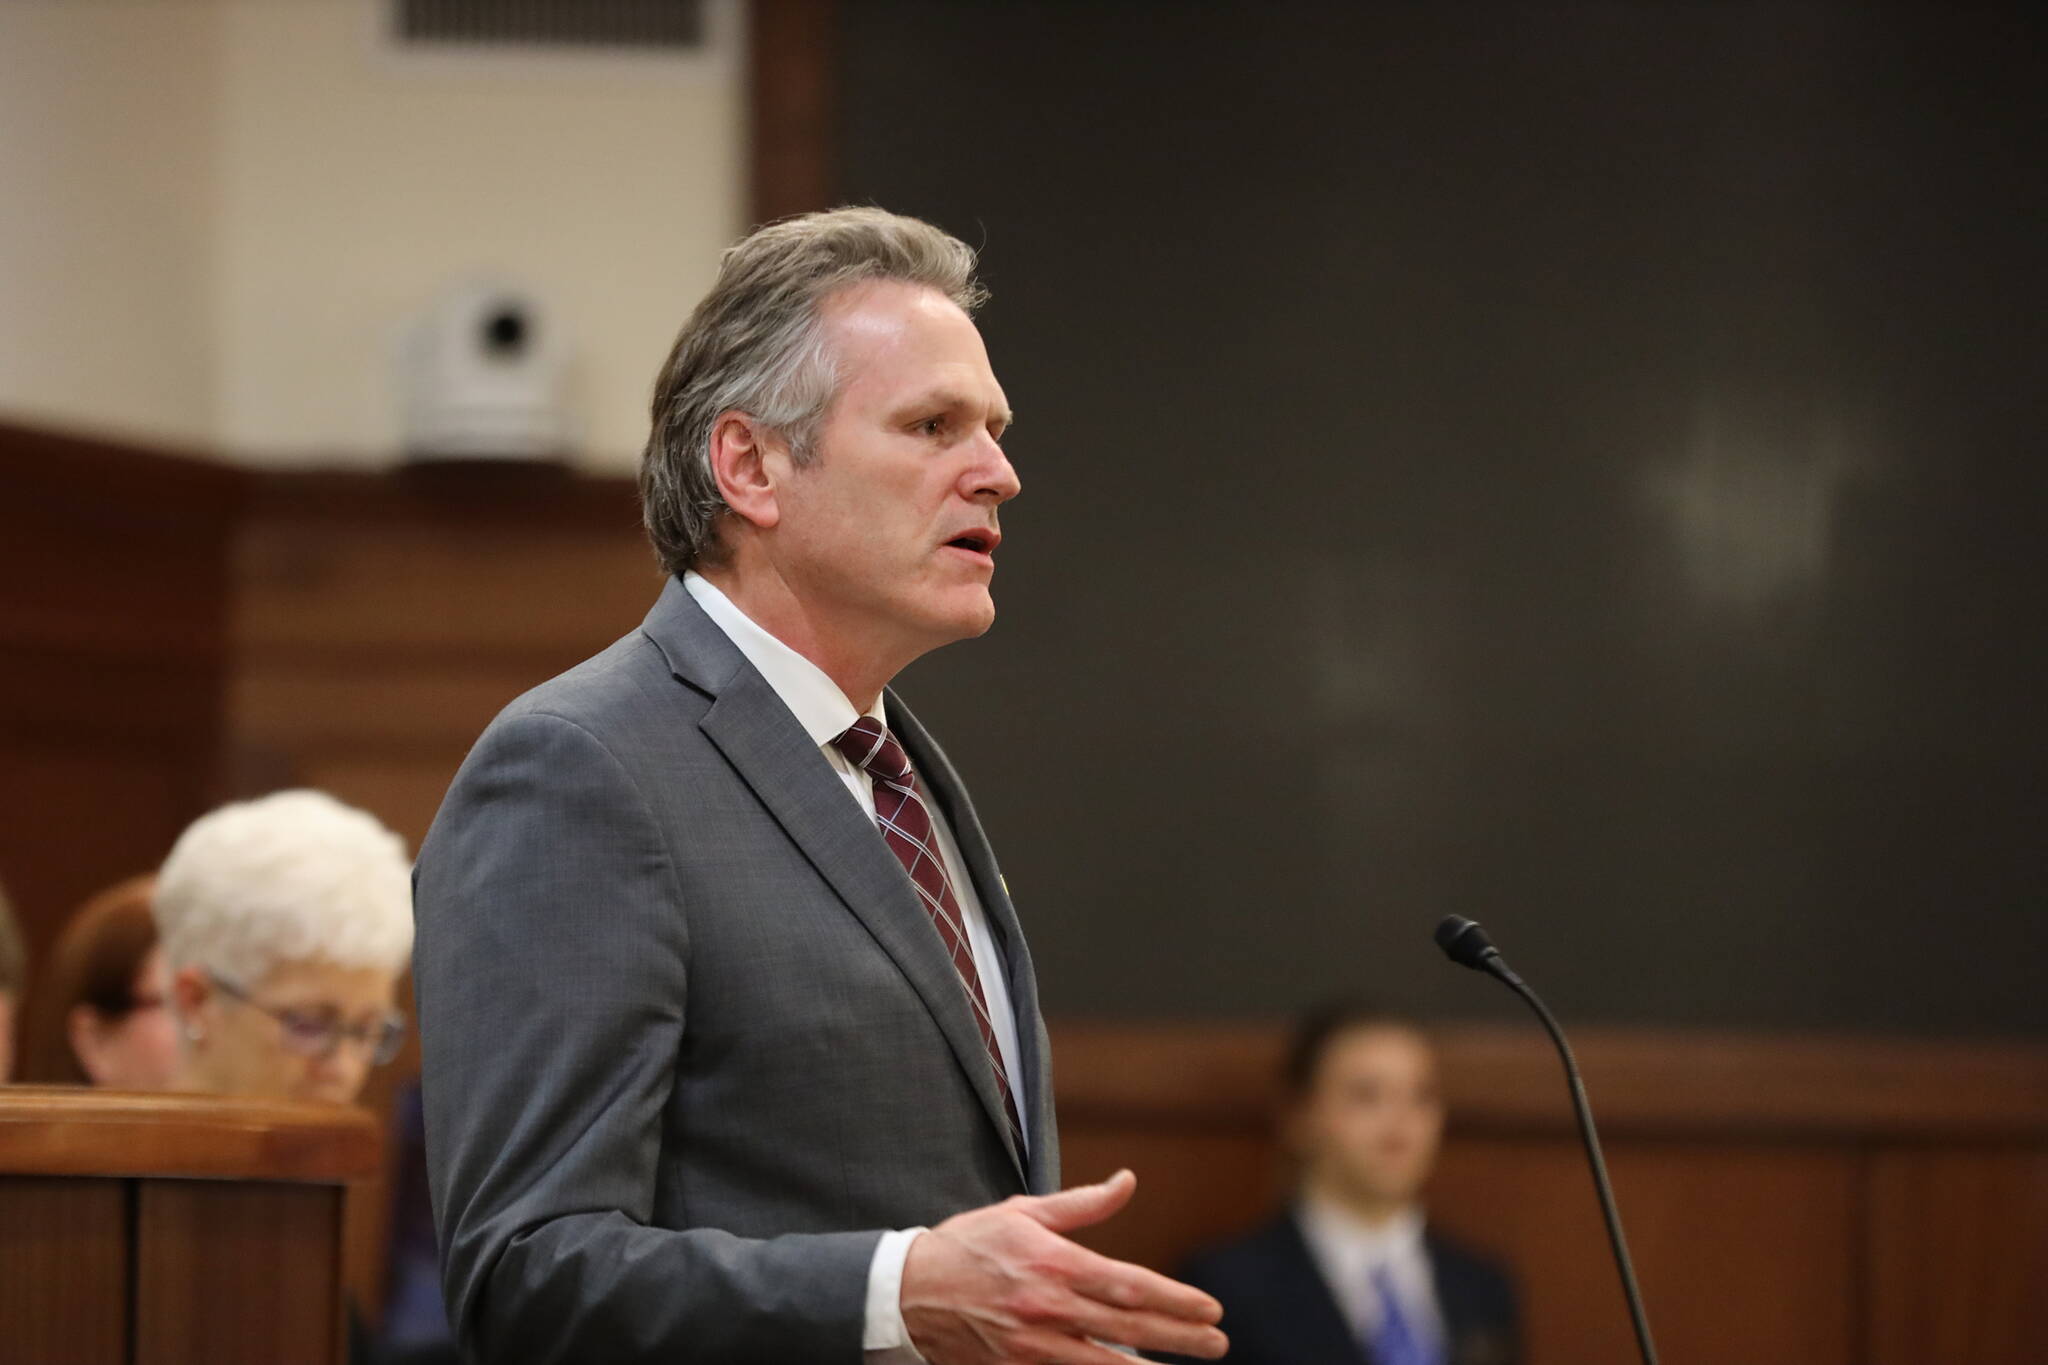 Gov. Mike Dunleavy addresses state lawmakers and guests attending his State of the State speech Monday night before a joint session of the Alaska State Legislature at the Alaska State Capitol. The 50-minute speech was praised by many legislators are more positive and less confrontational than his first address four years ago. (Clarise Larson / Juneau Empire)